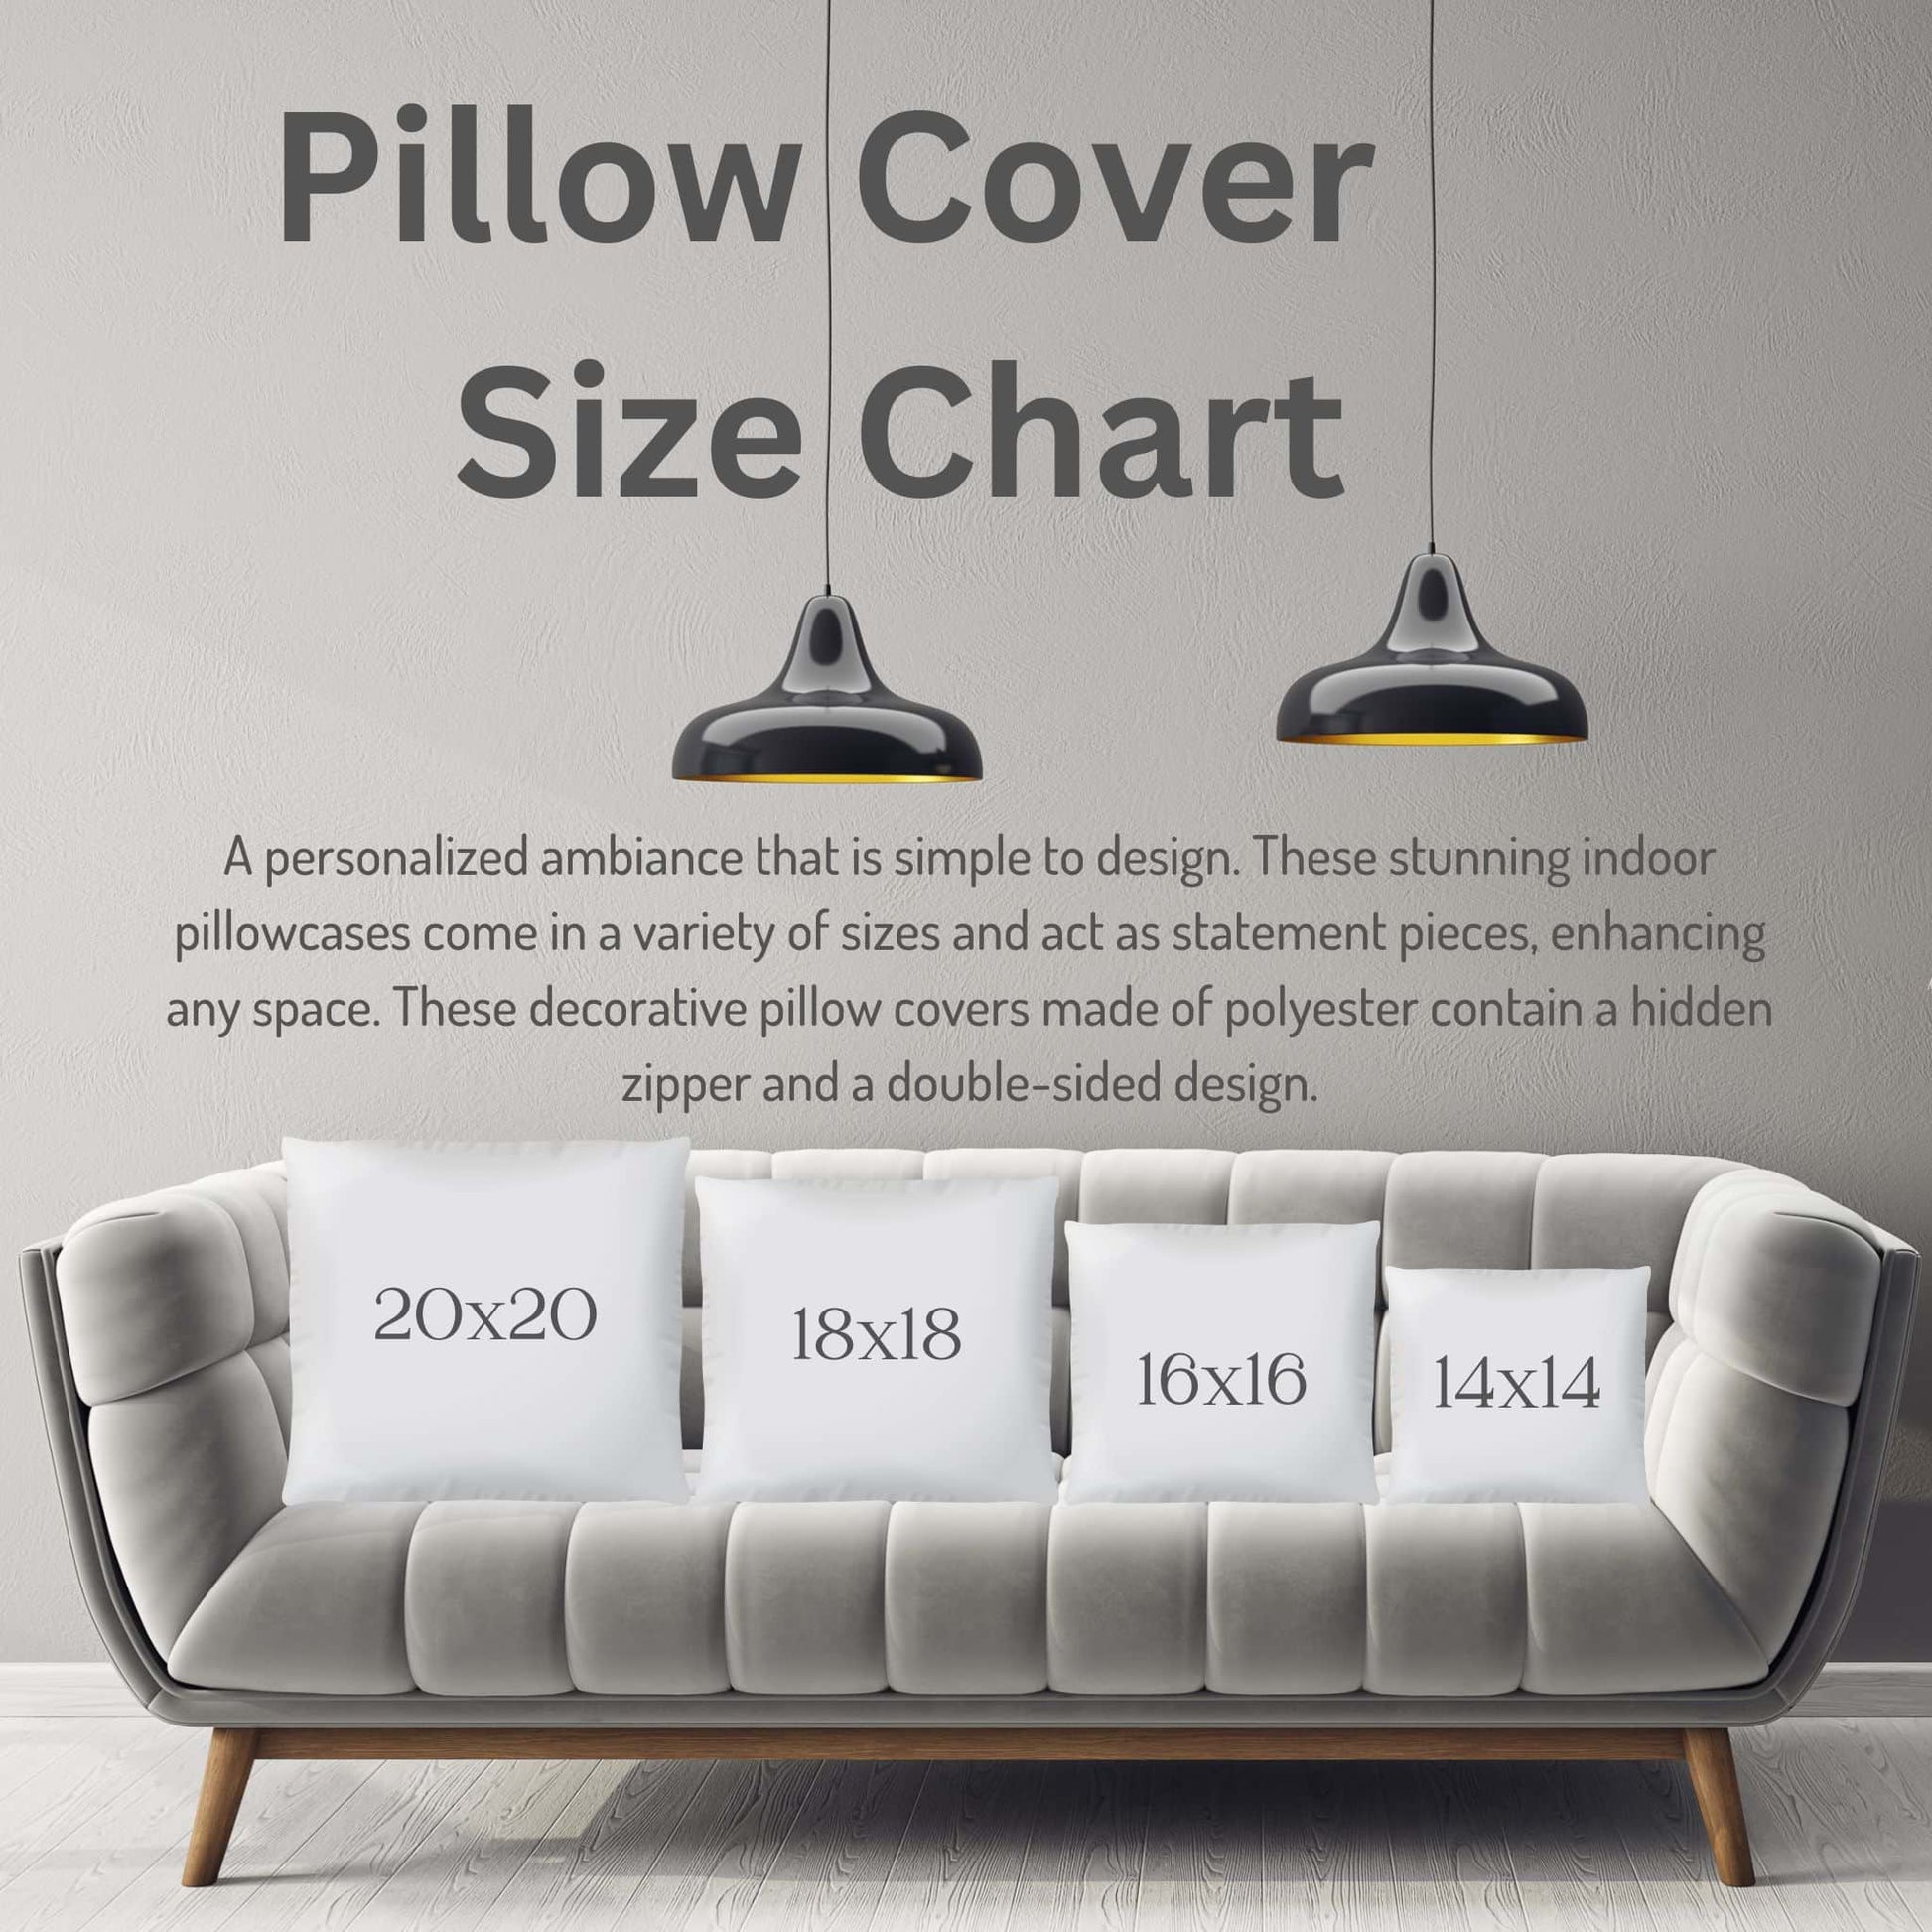 Urbane Squiggles Spun Polyester Square Pillow Case - ZumBuys